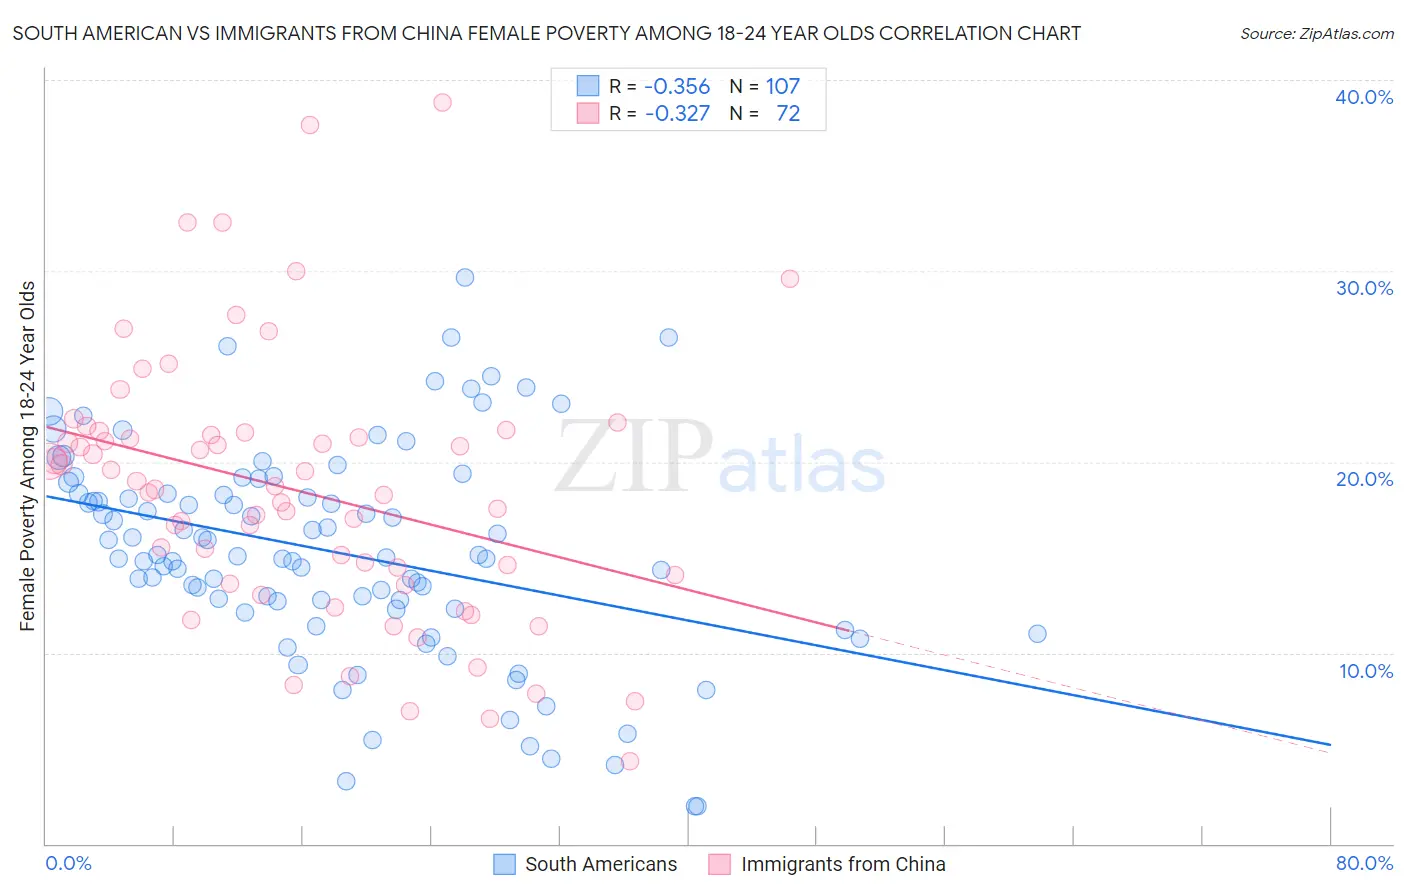 South American vs Immigrants from China Female Poverty Among 18-24 Year Olds